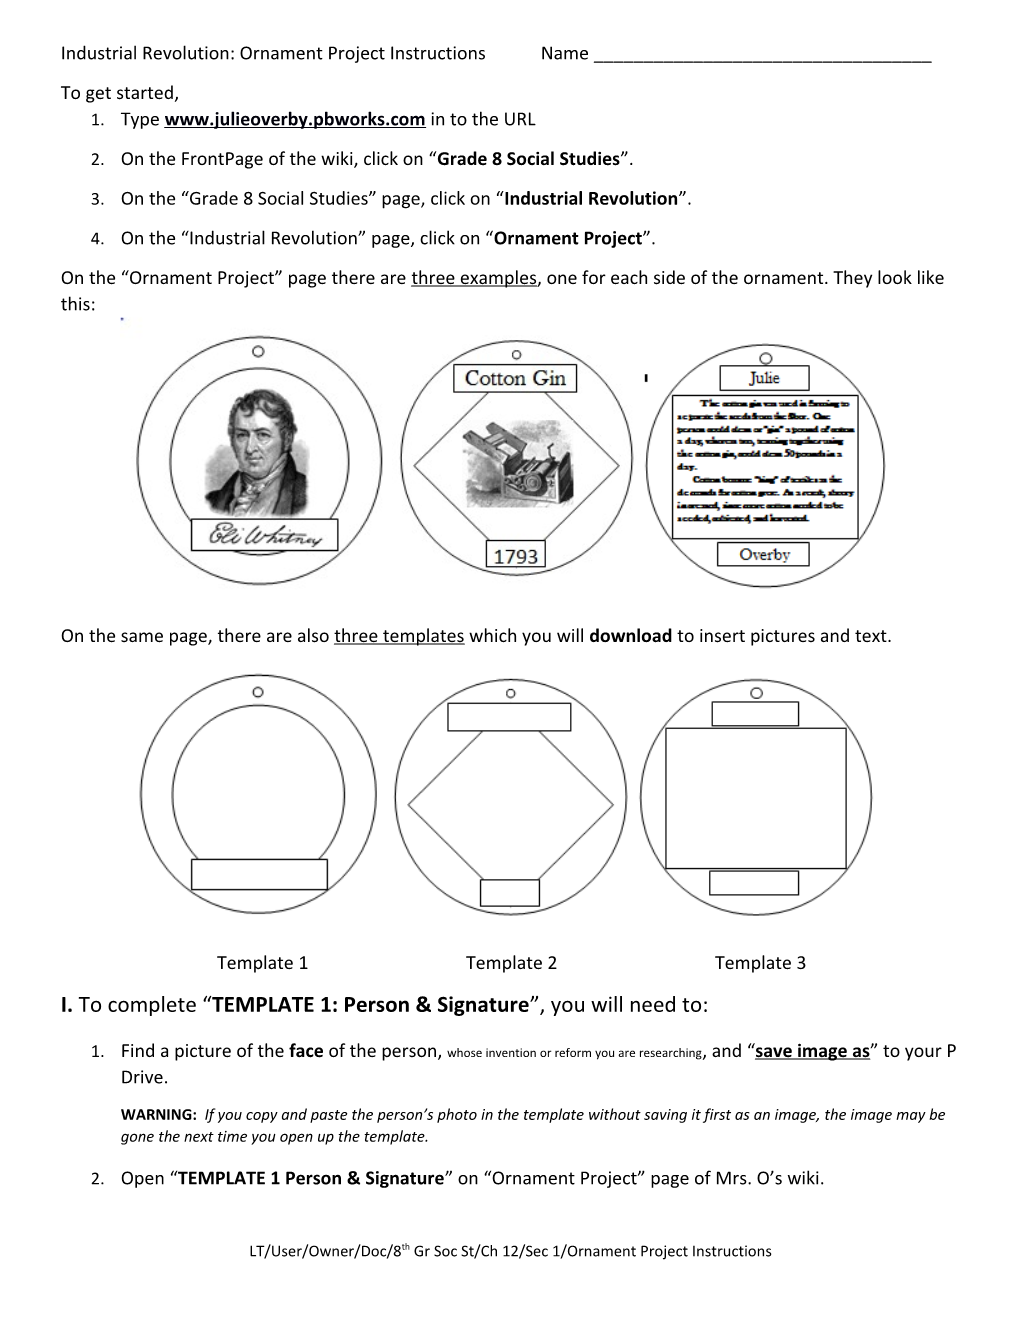 Industrial Revolution: Ornament Project Instructions Name ______